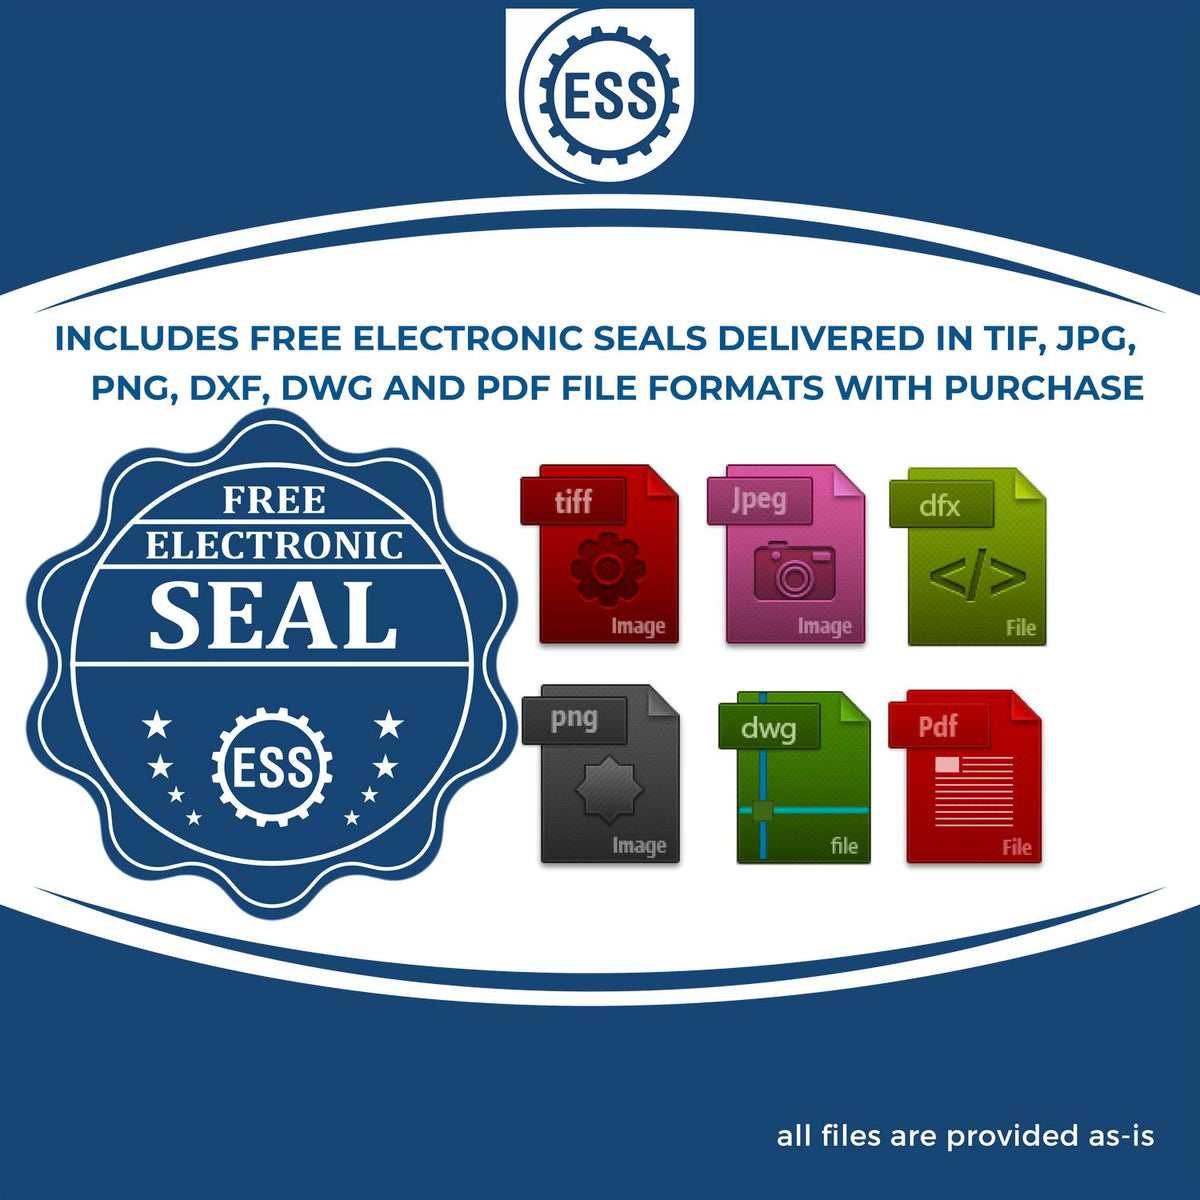 An infographic for the free electronic seal for the Self-Inking Idaho PE Stamp illustrating the different file type icons such as DXF, DWG, TIF, JPG and PNG.